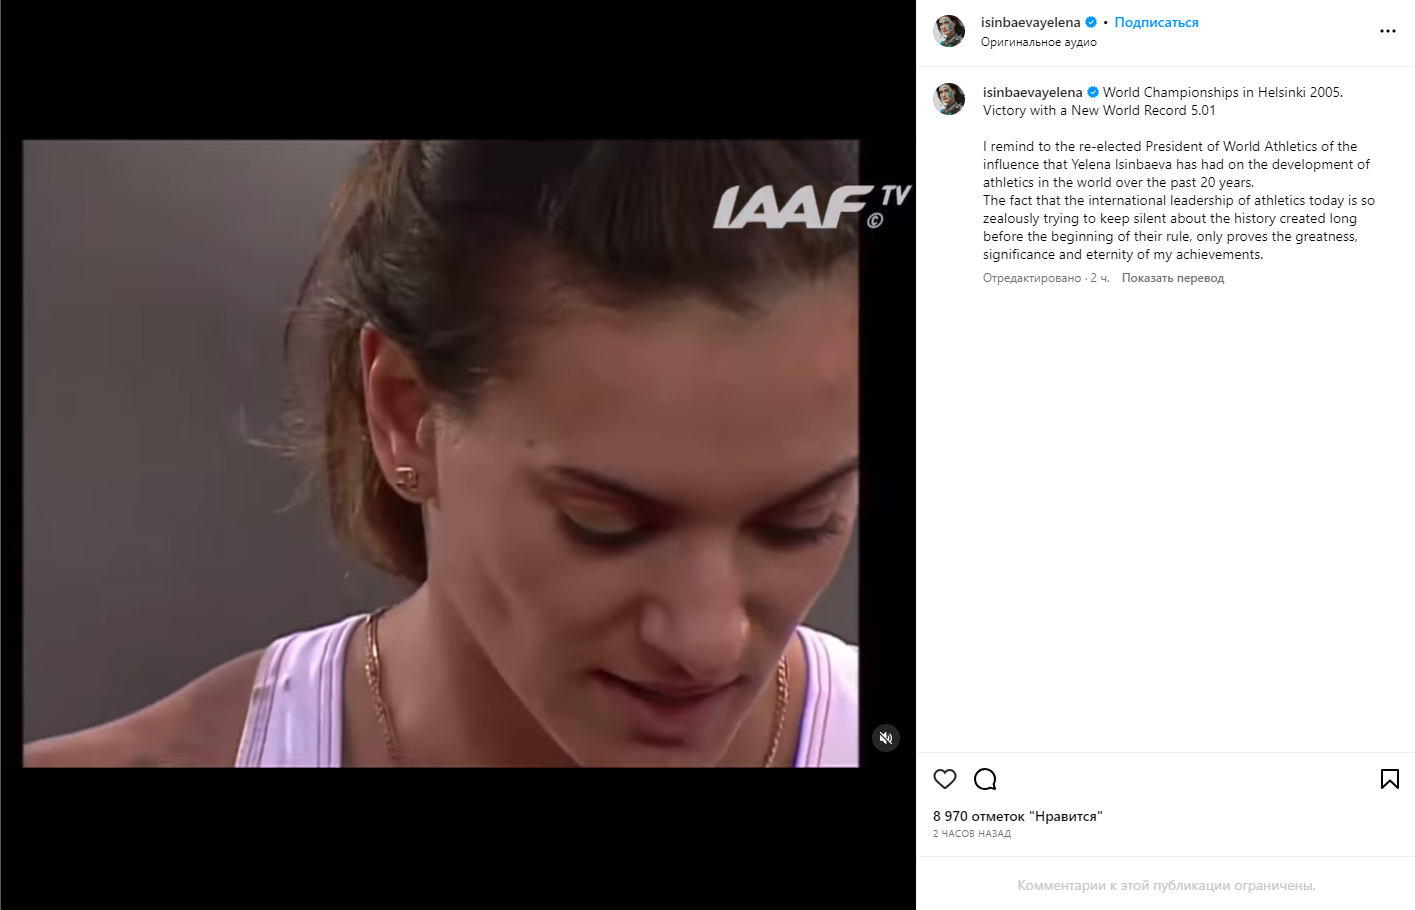 Isinbayeva forgot how she served Putin and spoke about ''silencing history'', attacking the international federation